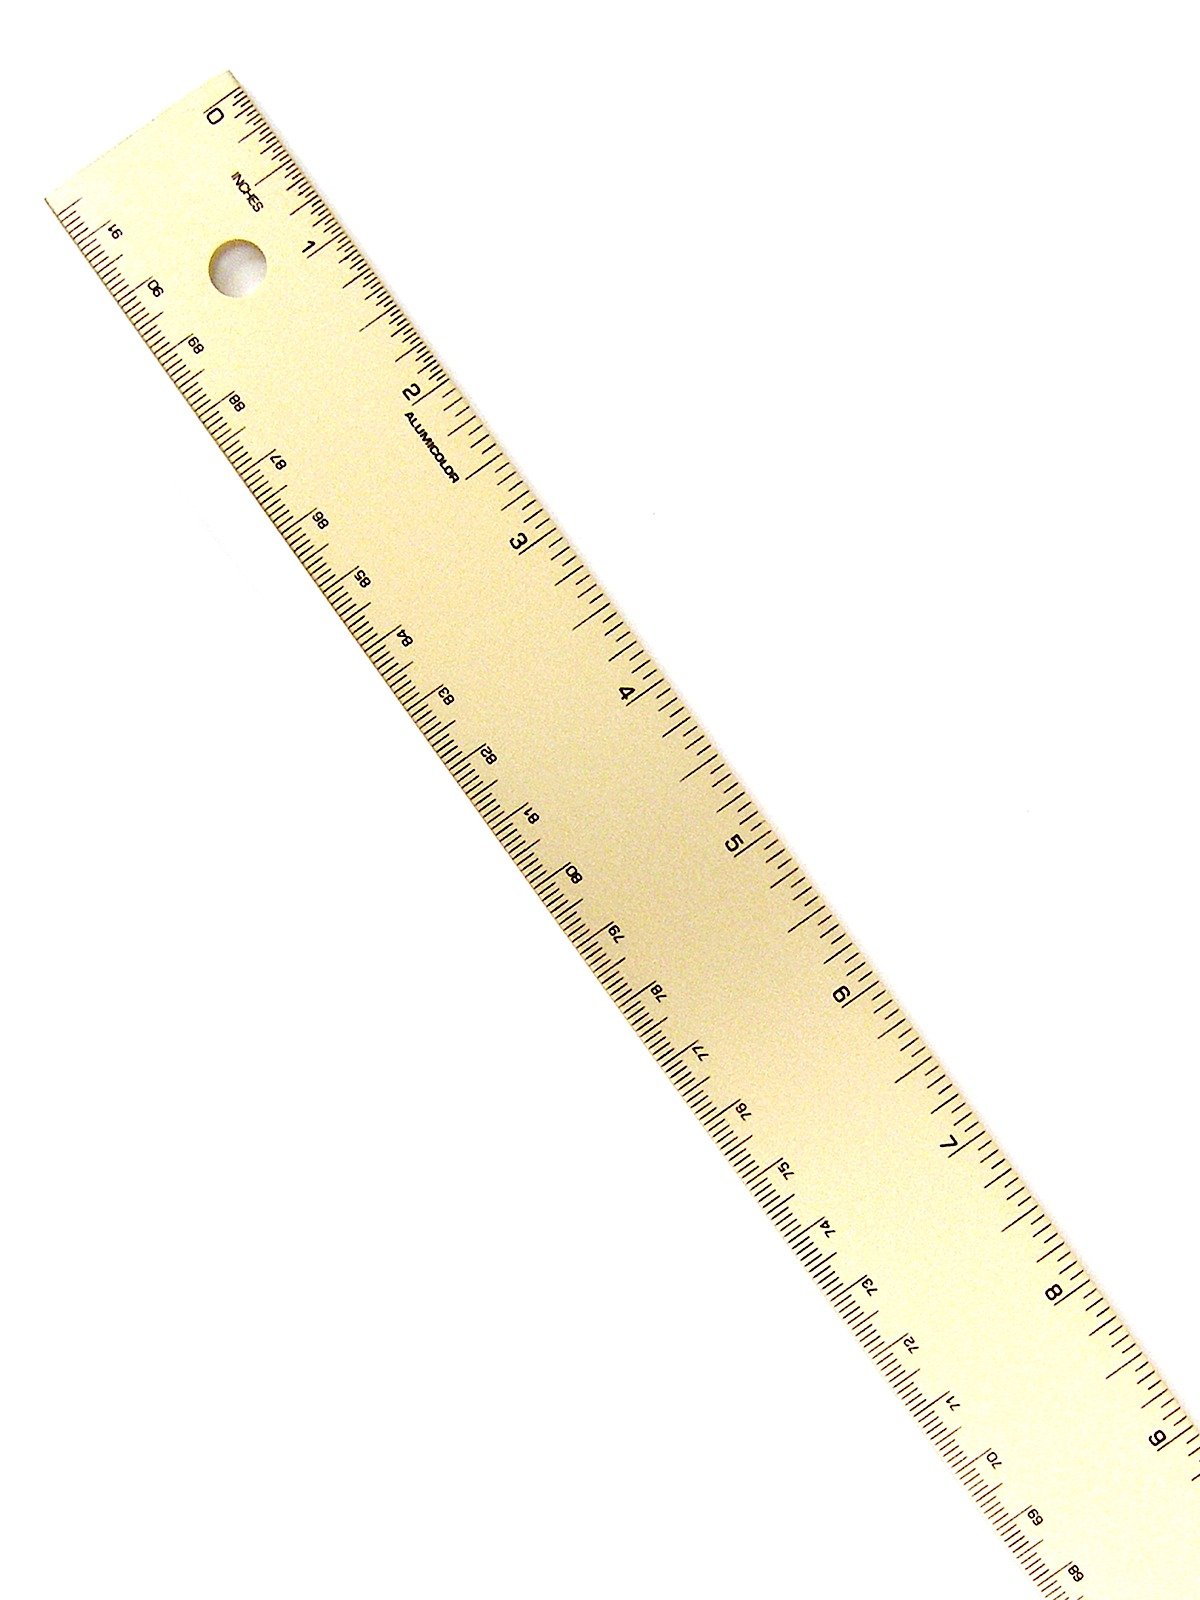 Alumicolor alumicolor aluminum straight edge with center finding back  ruler, 12 inch, gold